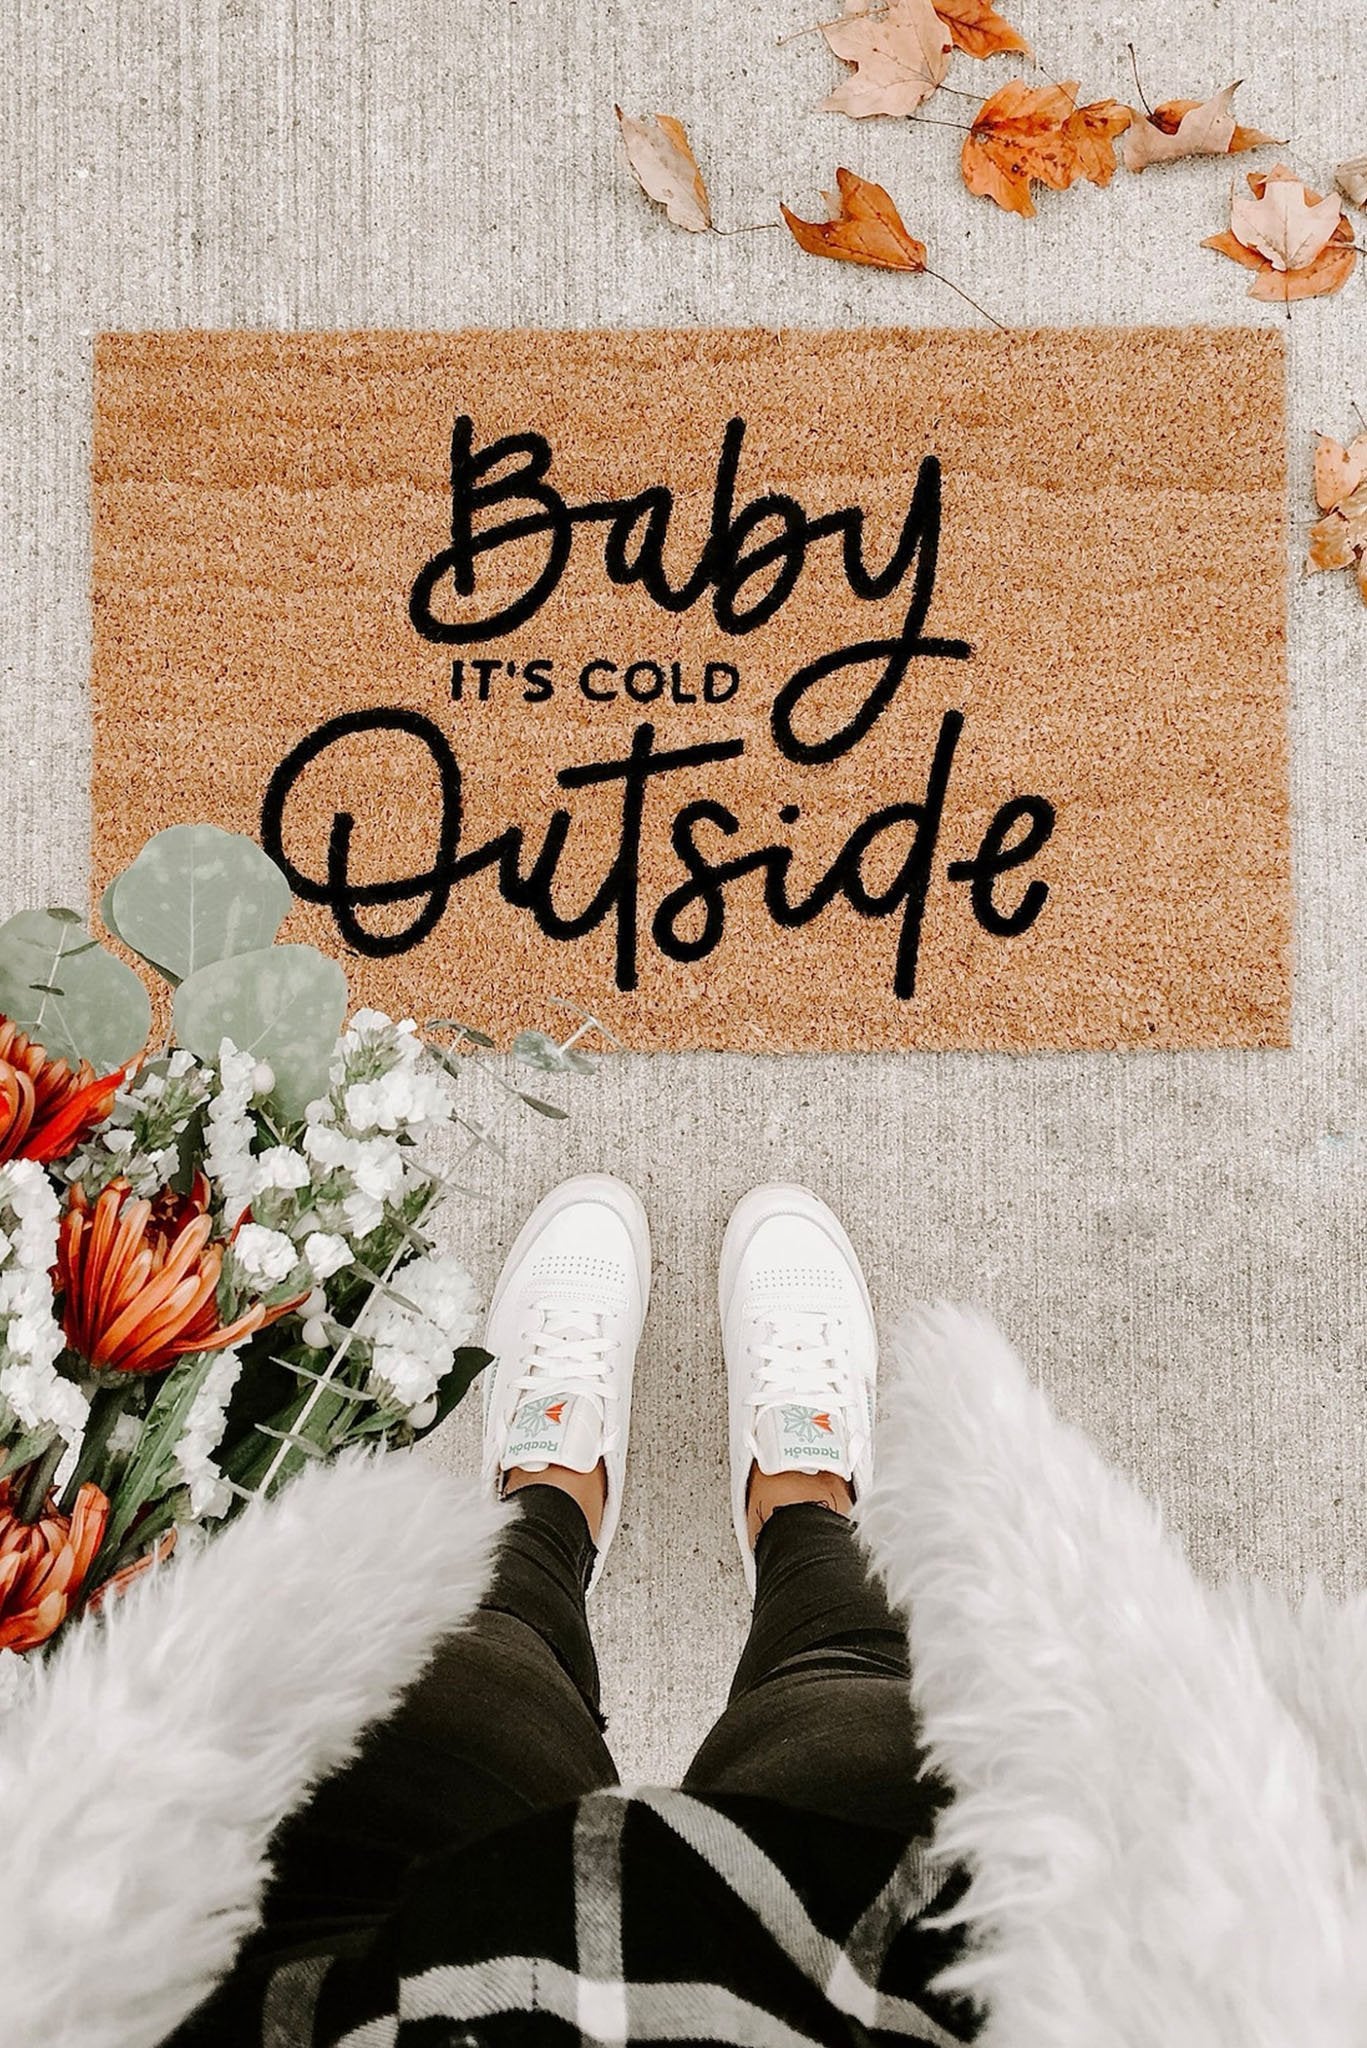 https://prettycollected.com/cdn/shop/articles/Baby_It_s_Cold_Outside_Doormat_-_Christmas_Doormat_-_Holiday_Doormats_-_Pretty_Collected-832230_1367x.jpg?v=1663747202